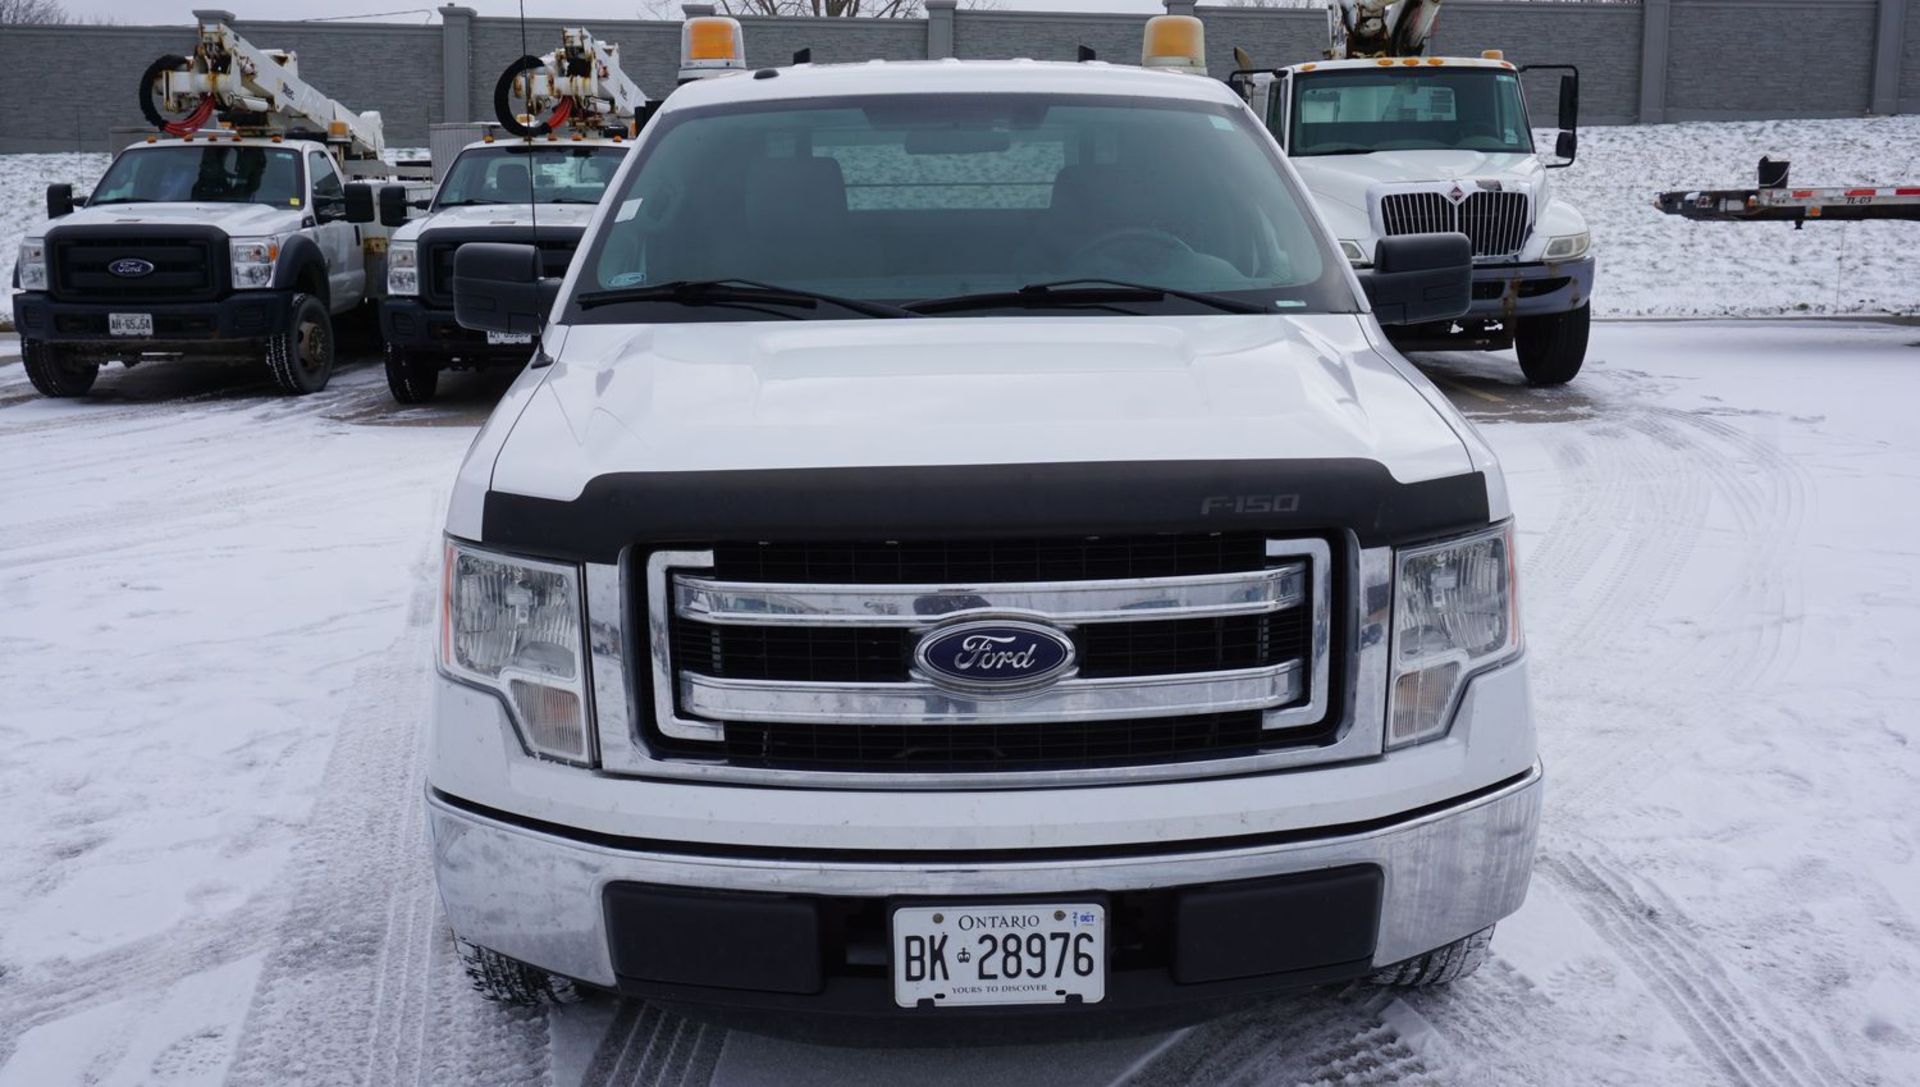 2014 FORD F150XL REG CAB 4X2 PICKUP W/ 5.0L V8 GAS ENGINE C/W (2) WEATHER GUARD HI-SIDE TOOL BOXES, - Image 3 of 11